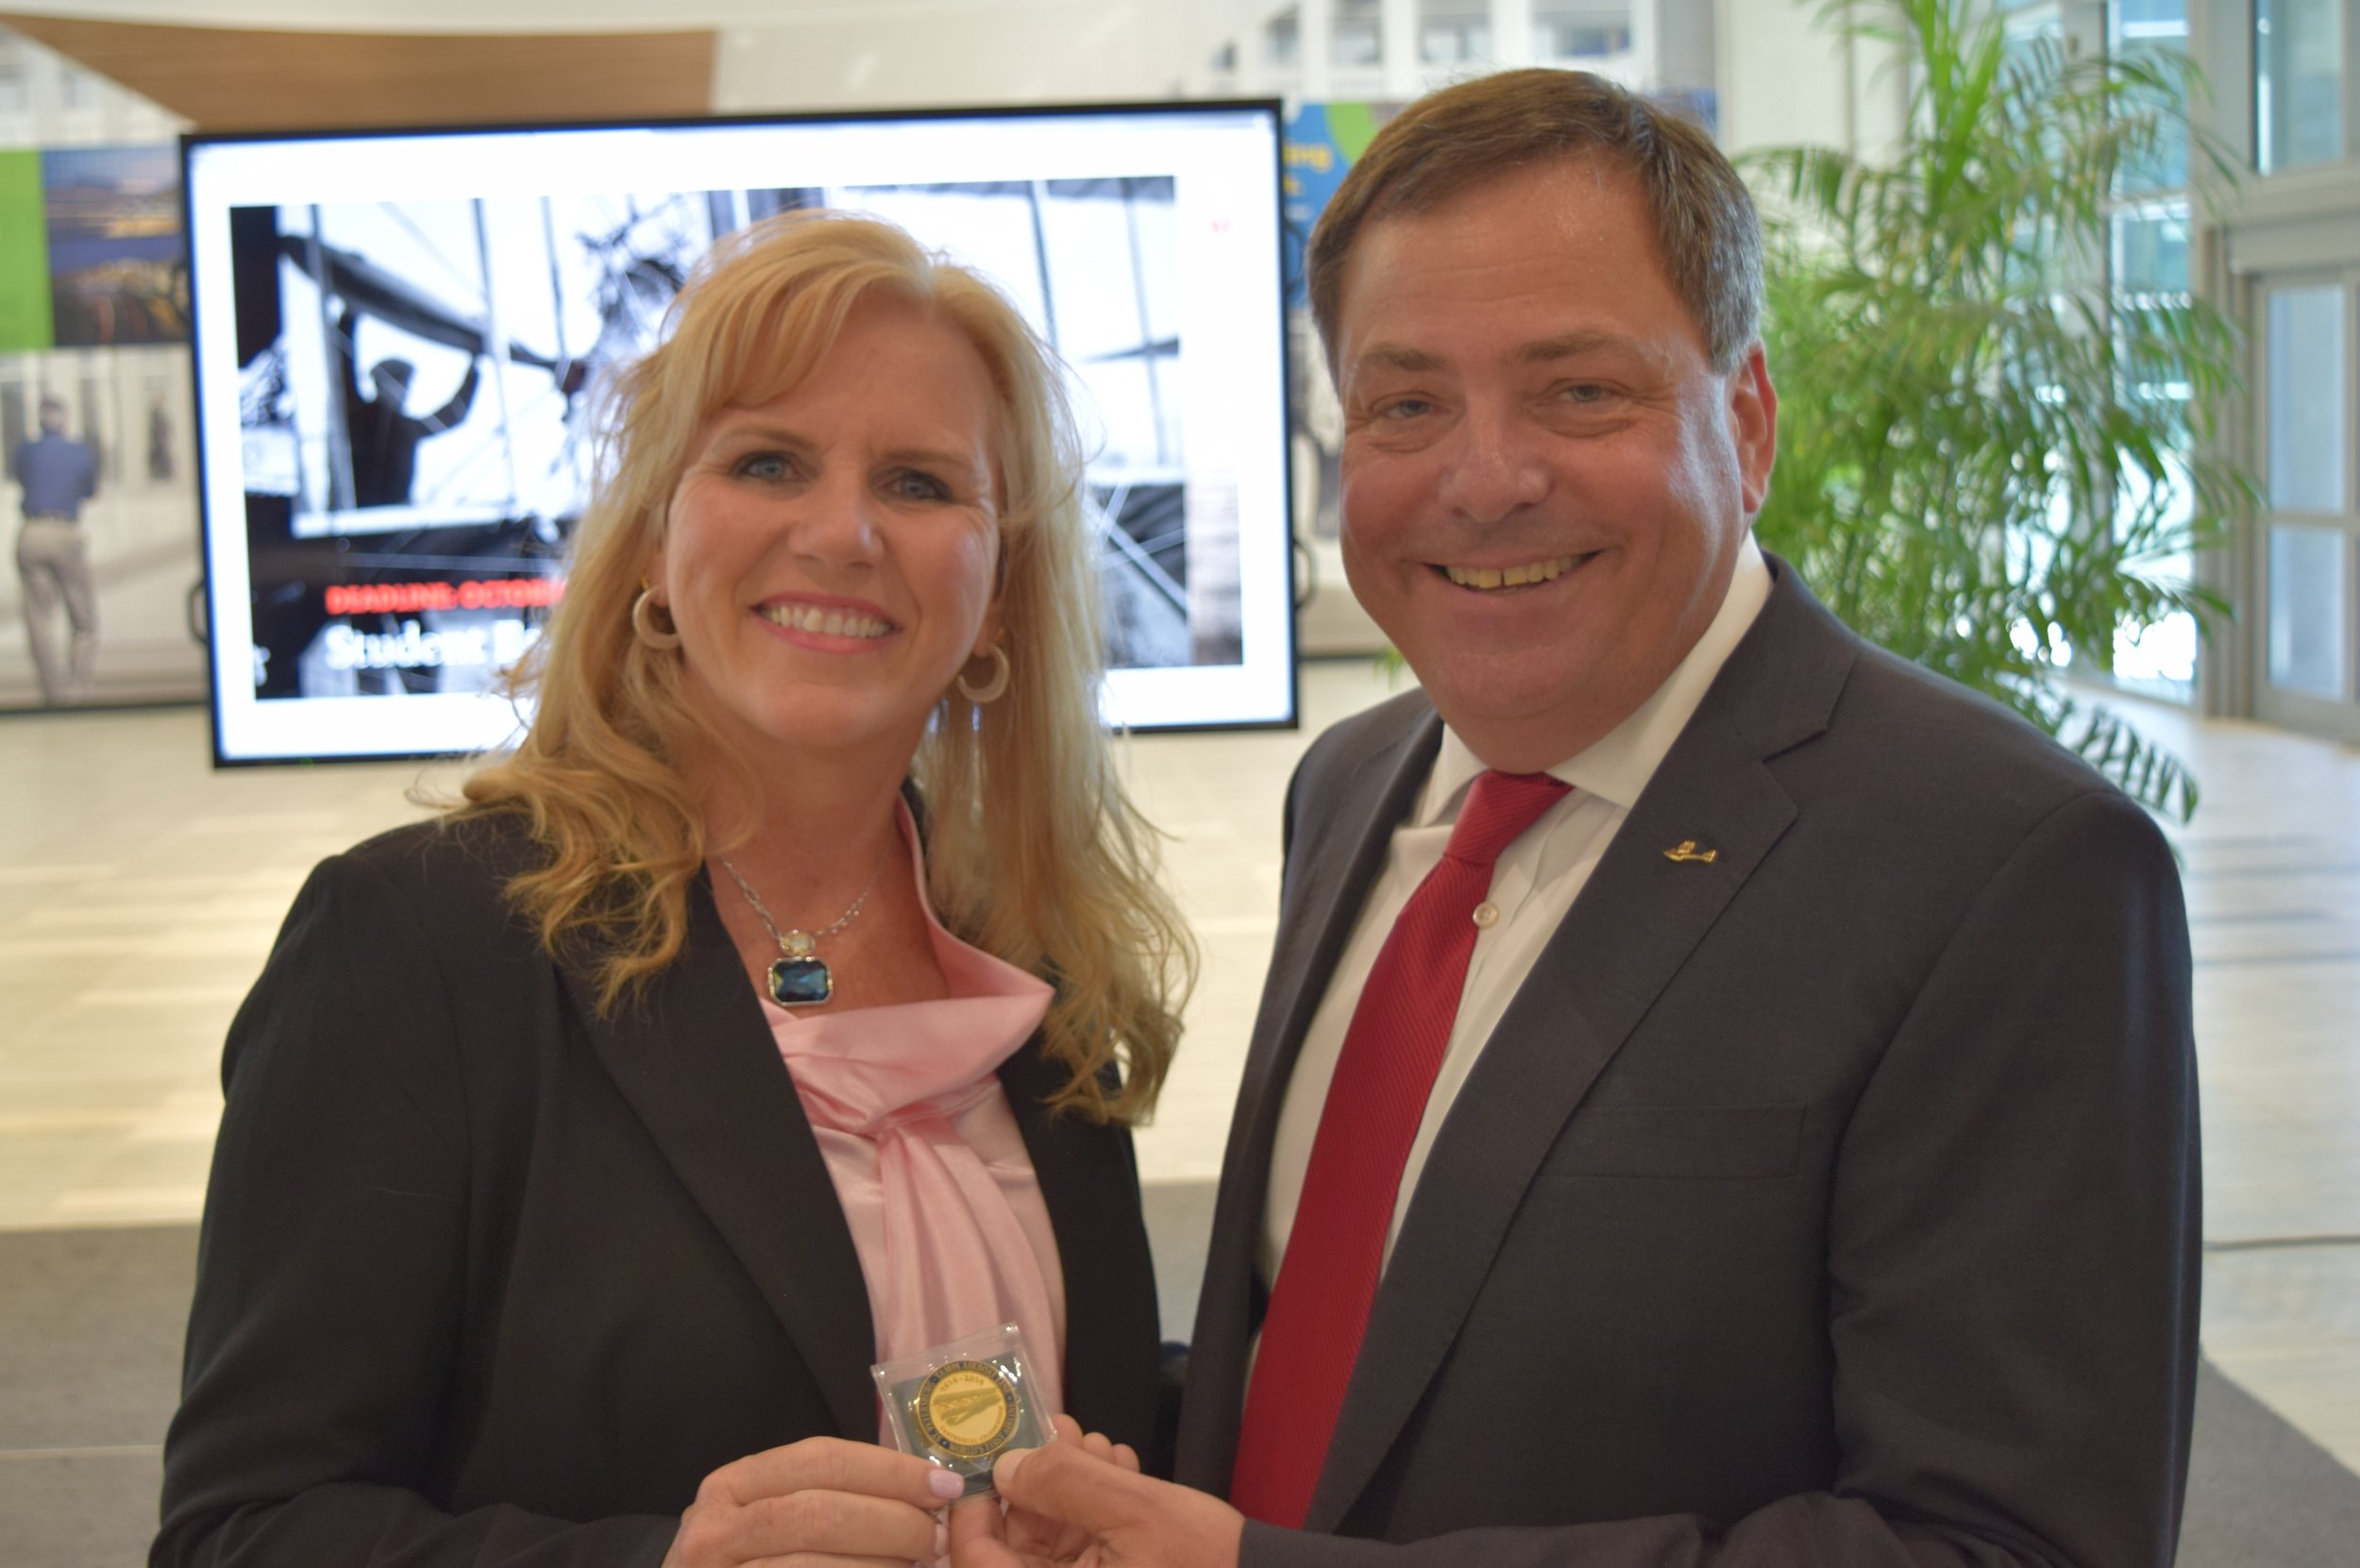 Paul Piro presenting Tony Jannus Centennial Coin to Jeannie Driscoll after Press Conference, 9 May '17.JPG